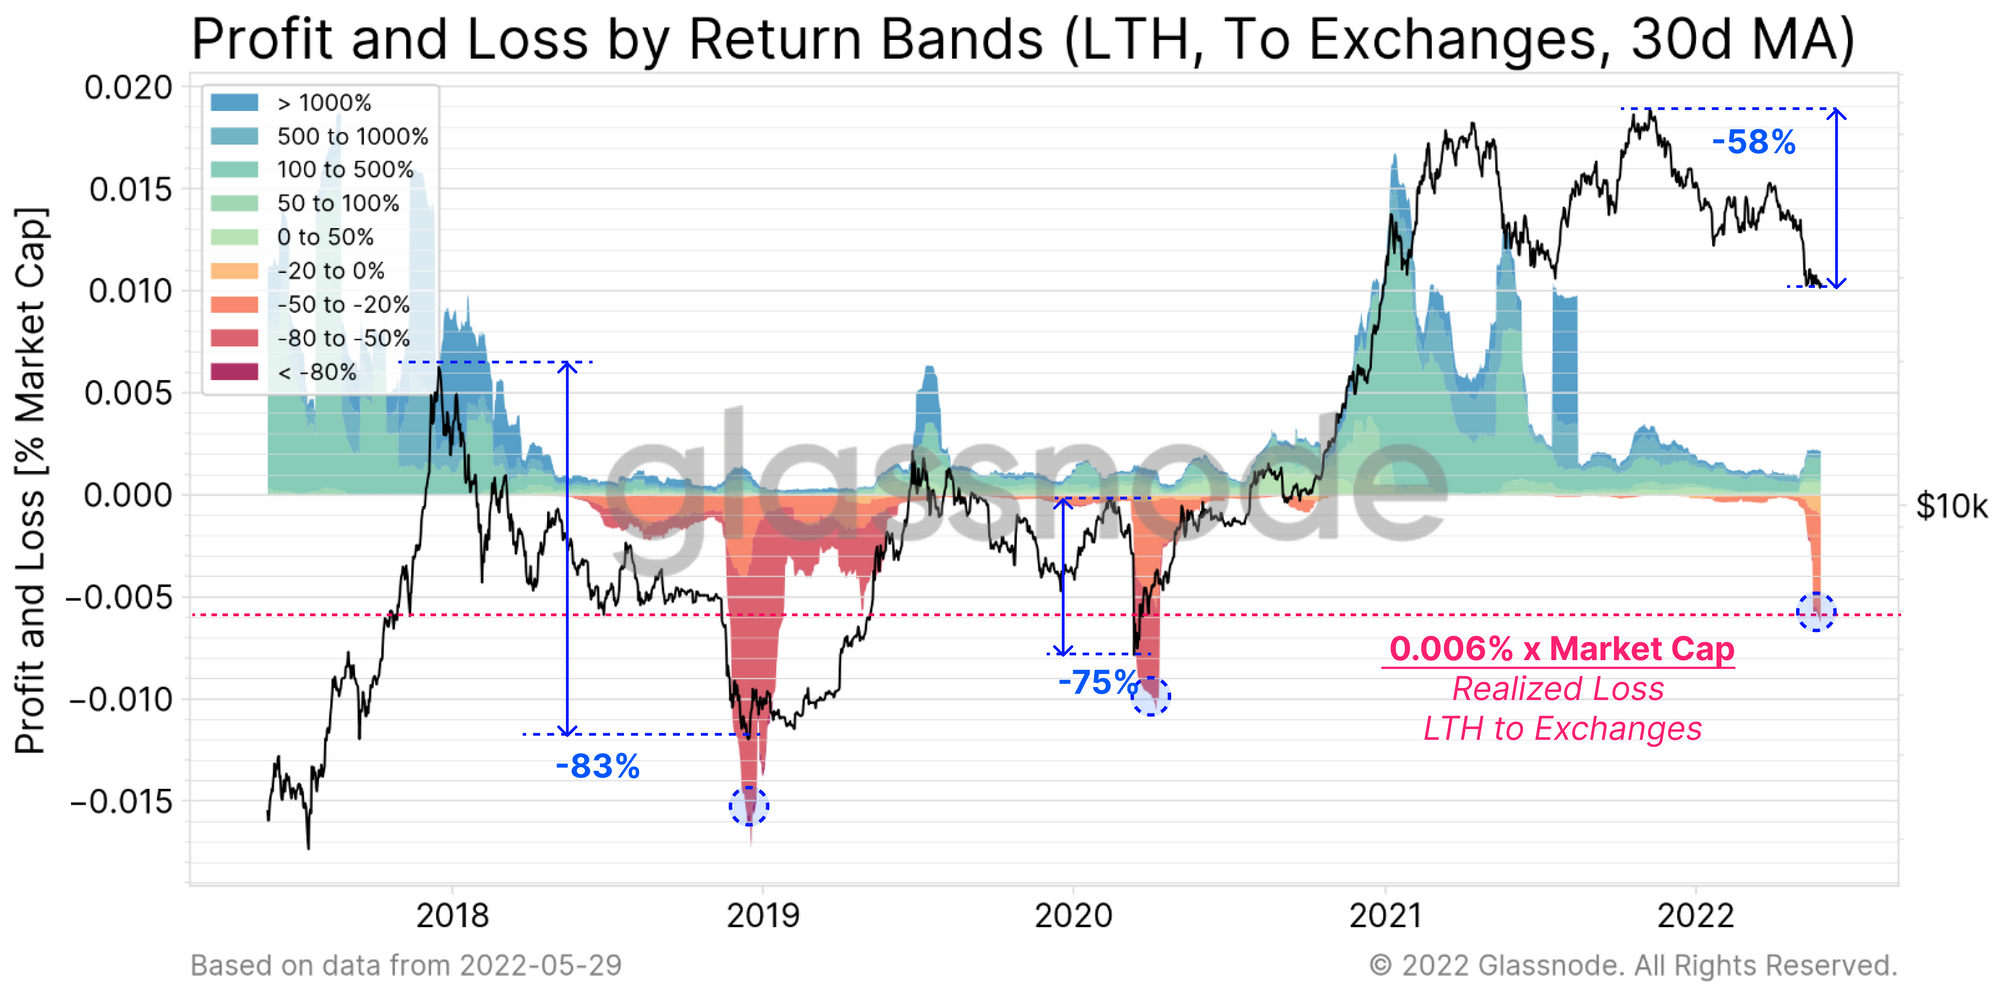 Profit and Loss by Return Bands (LTH, To Exchanges, 30d MA)